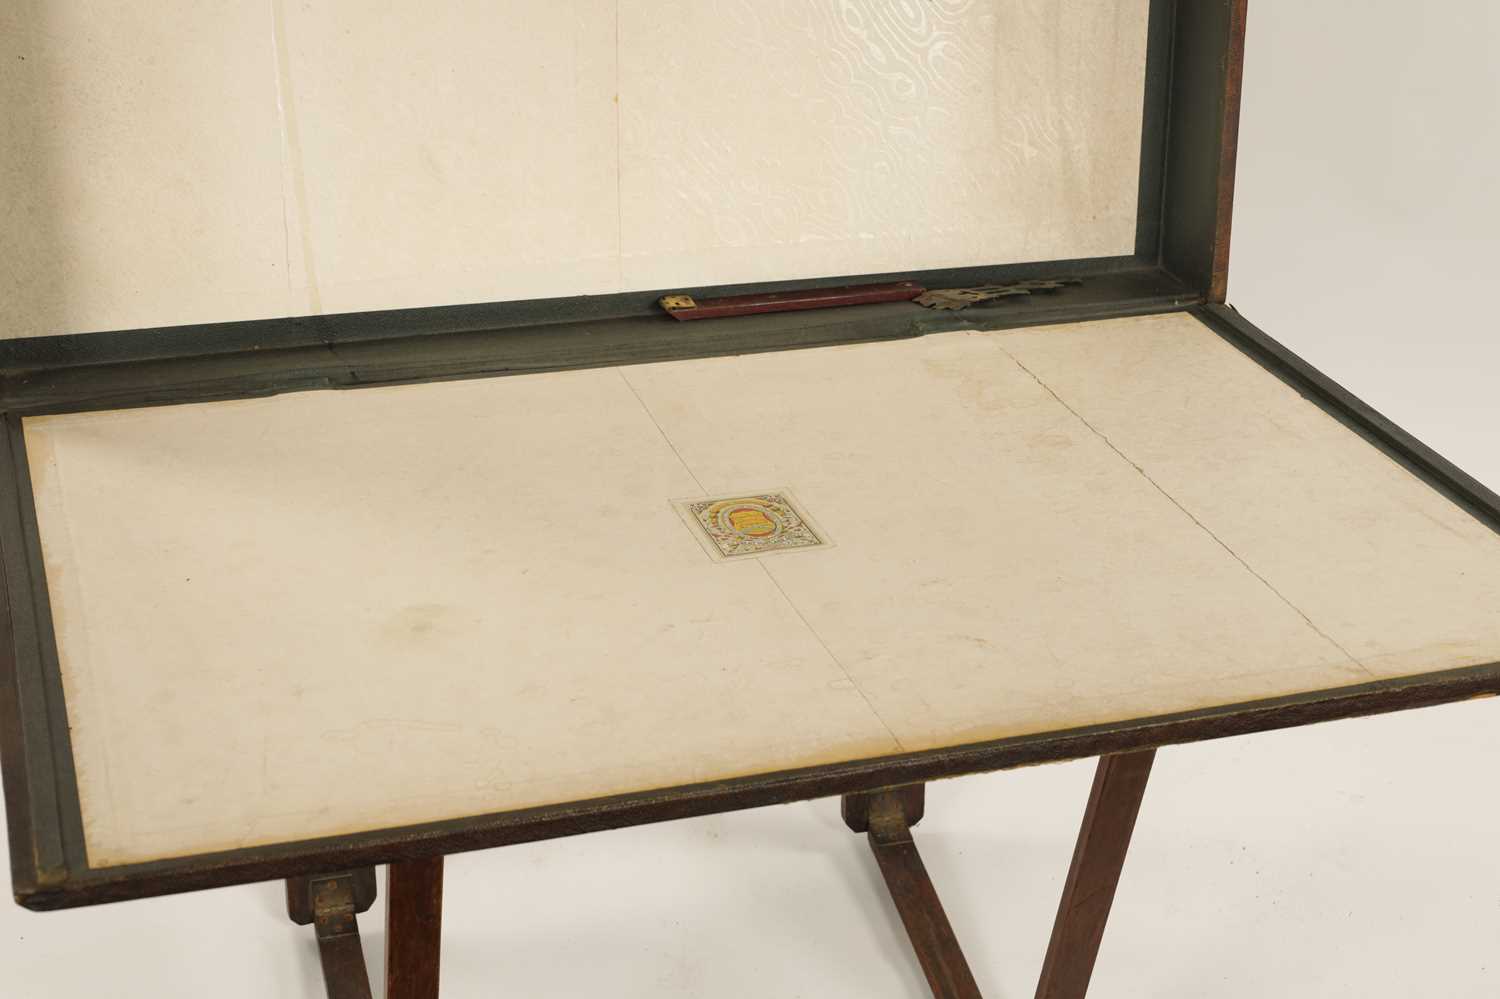 A LATE 19TH-CENTURY PUGINESQUE OAK AND LEATHERWORK FOLIO STAND - Image 7 of 9